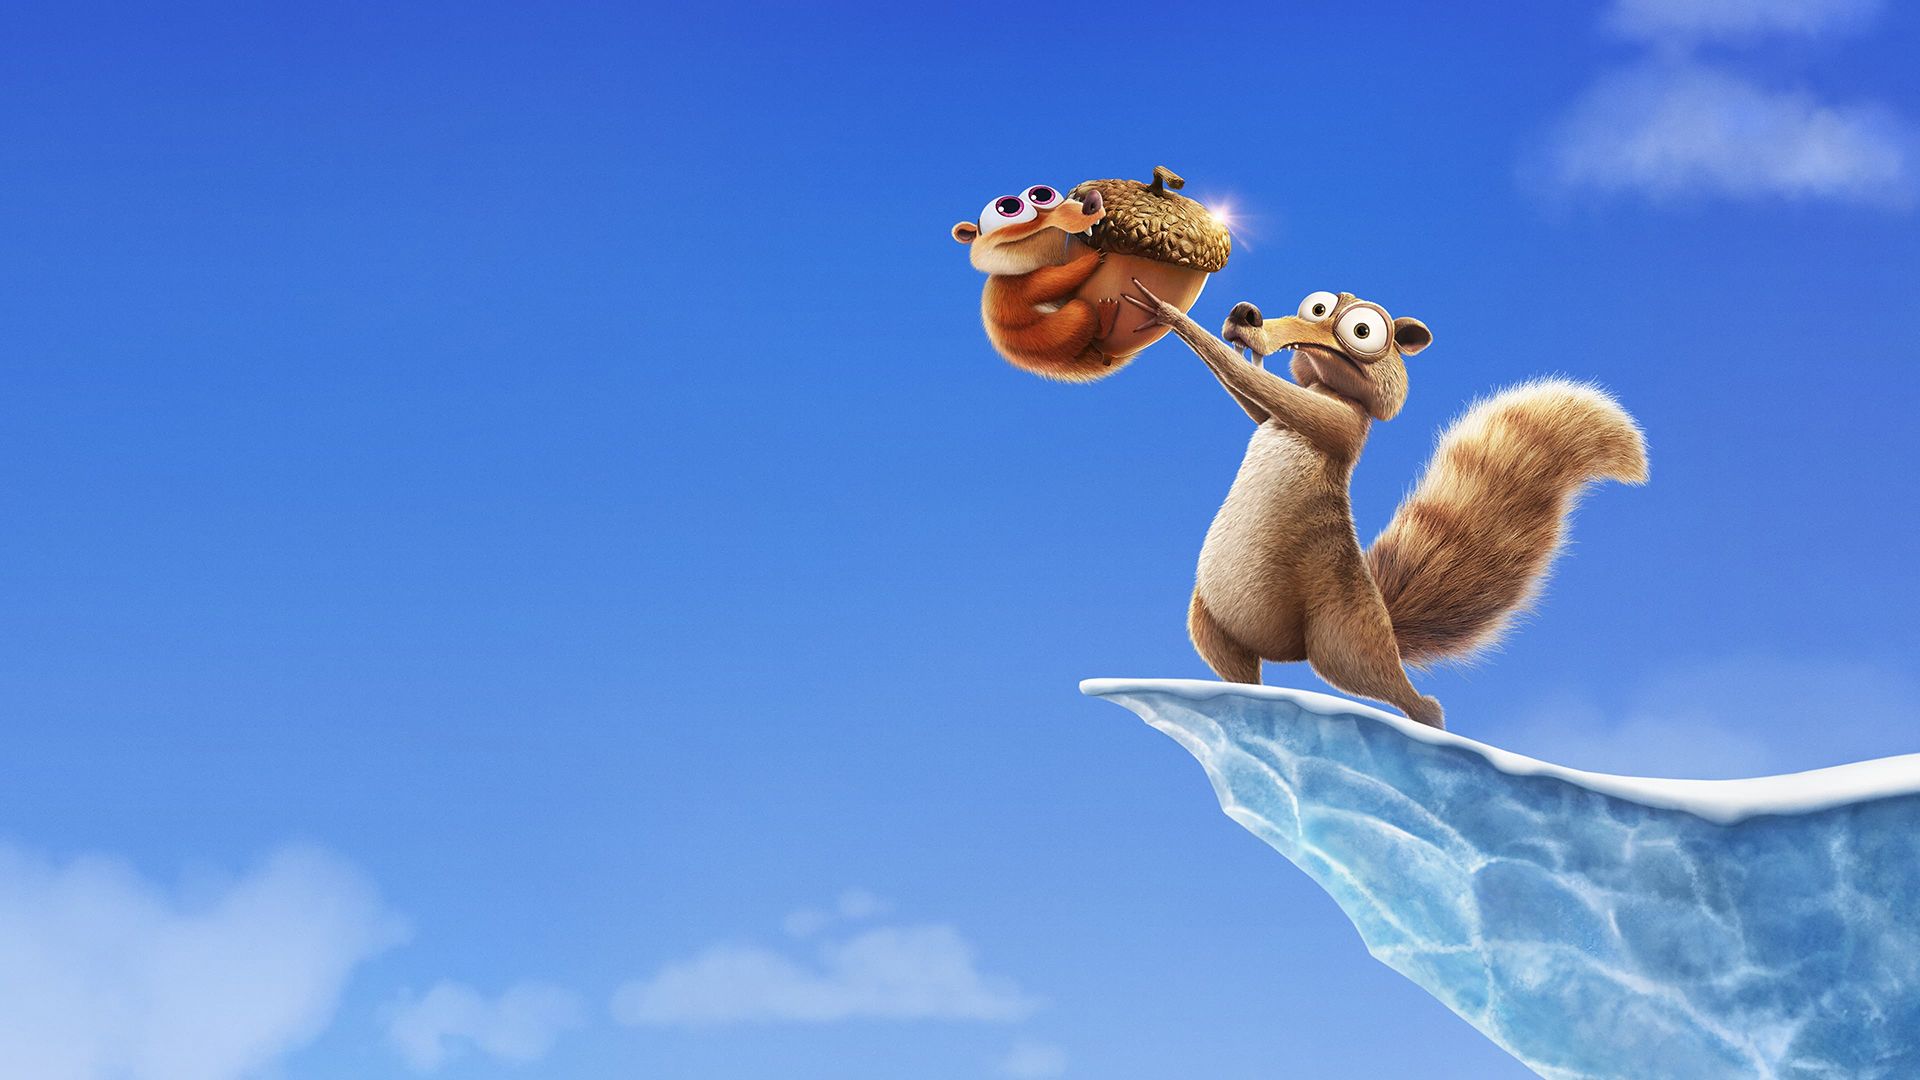 Ice Age: Scrat Tales background